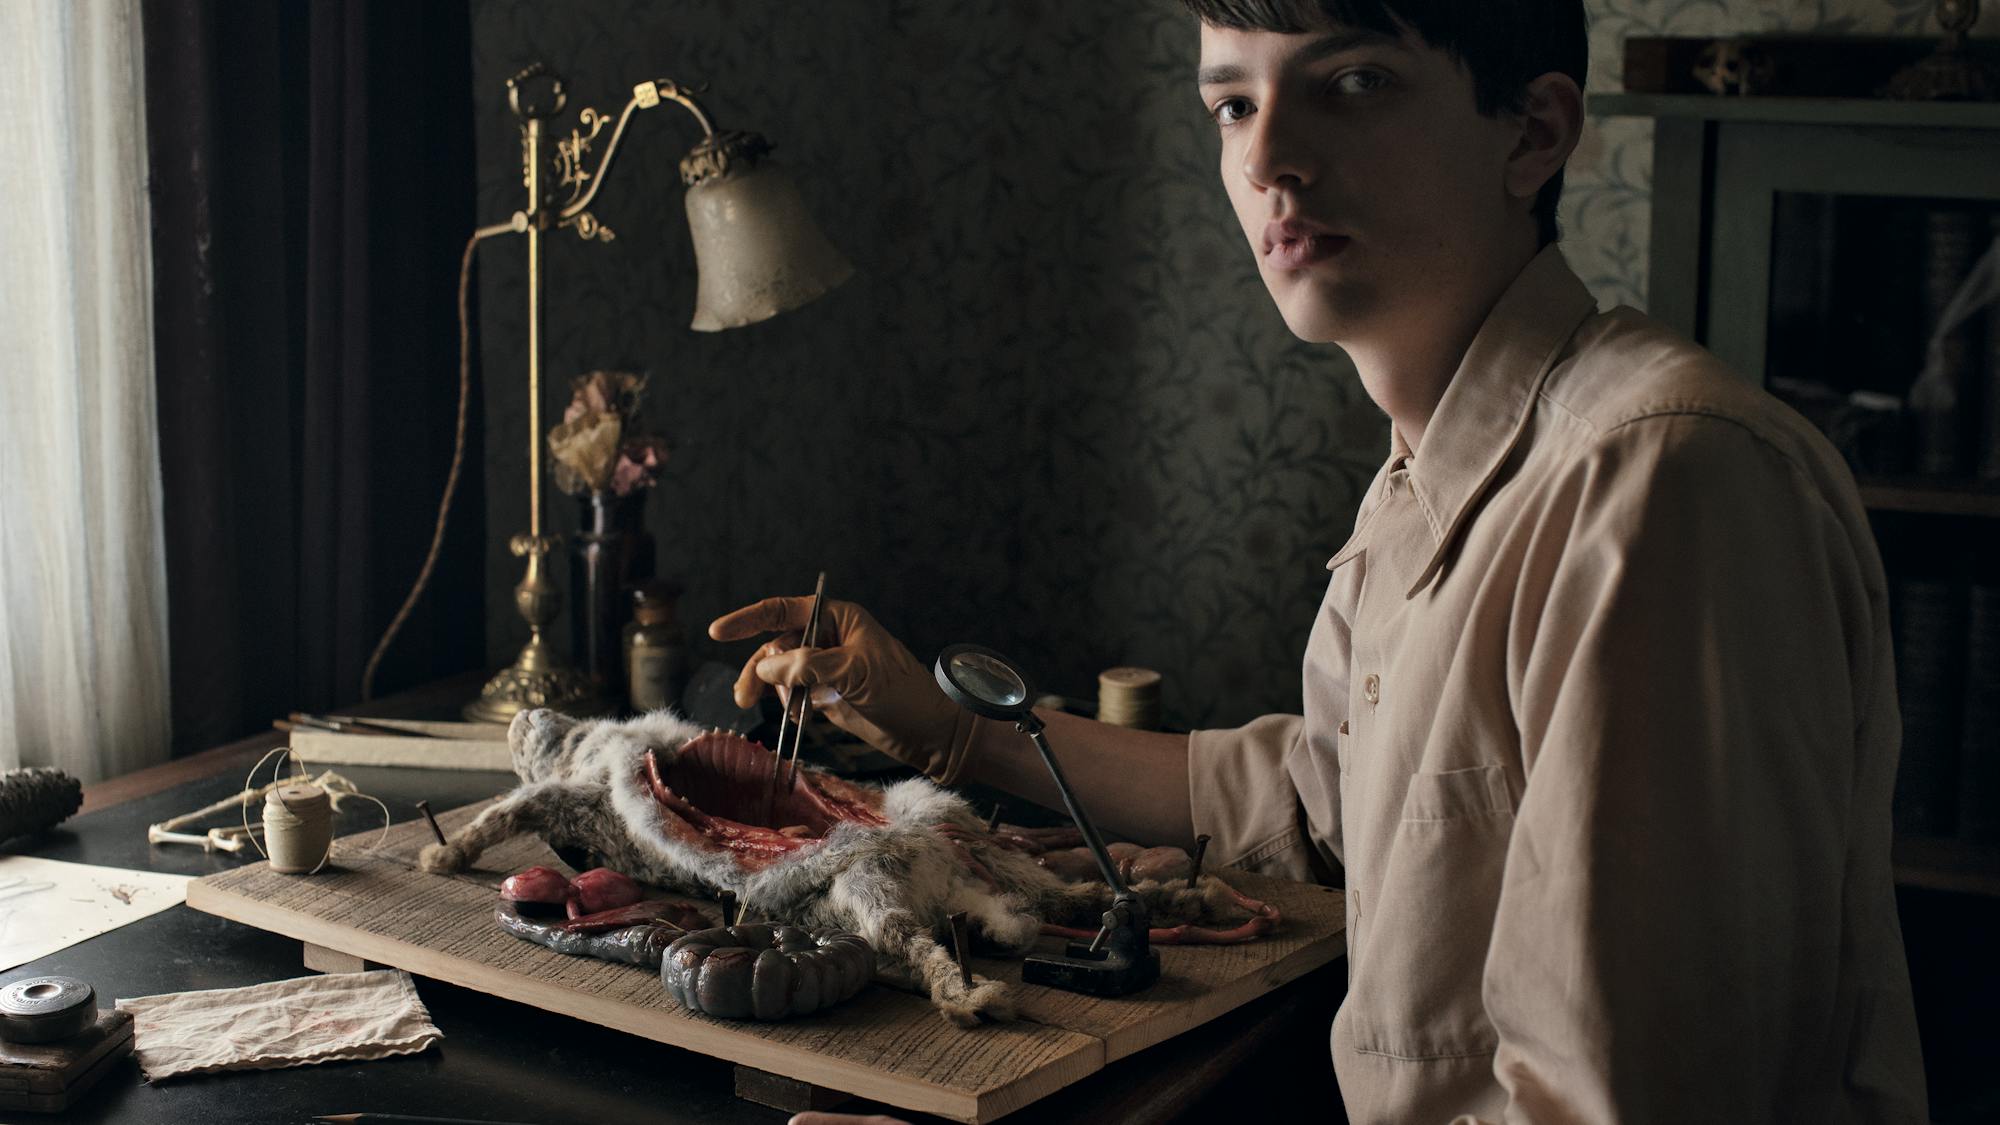 Kodi Smit-McPhee sits at a desk with an open rabbit in front of him. He wears a light colored buttoned down shirt and holds surgical instruments.